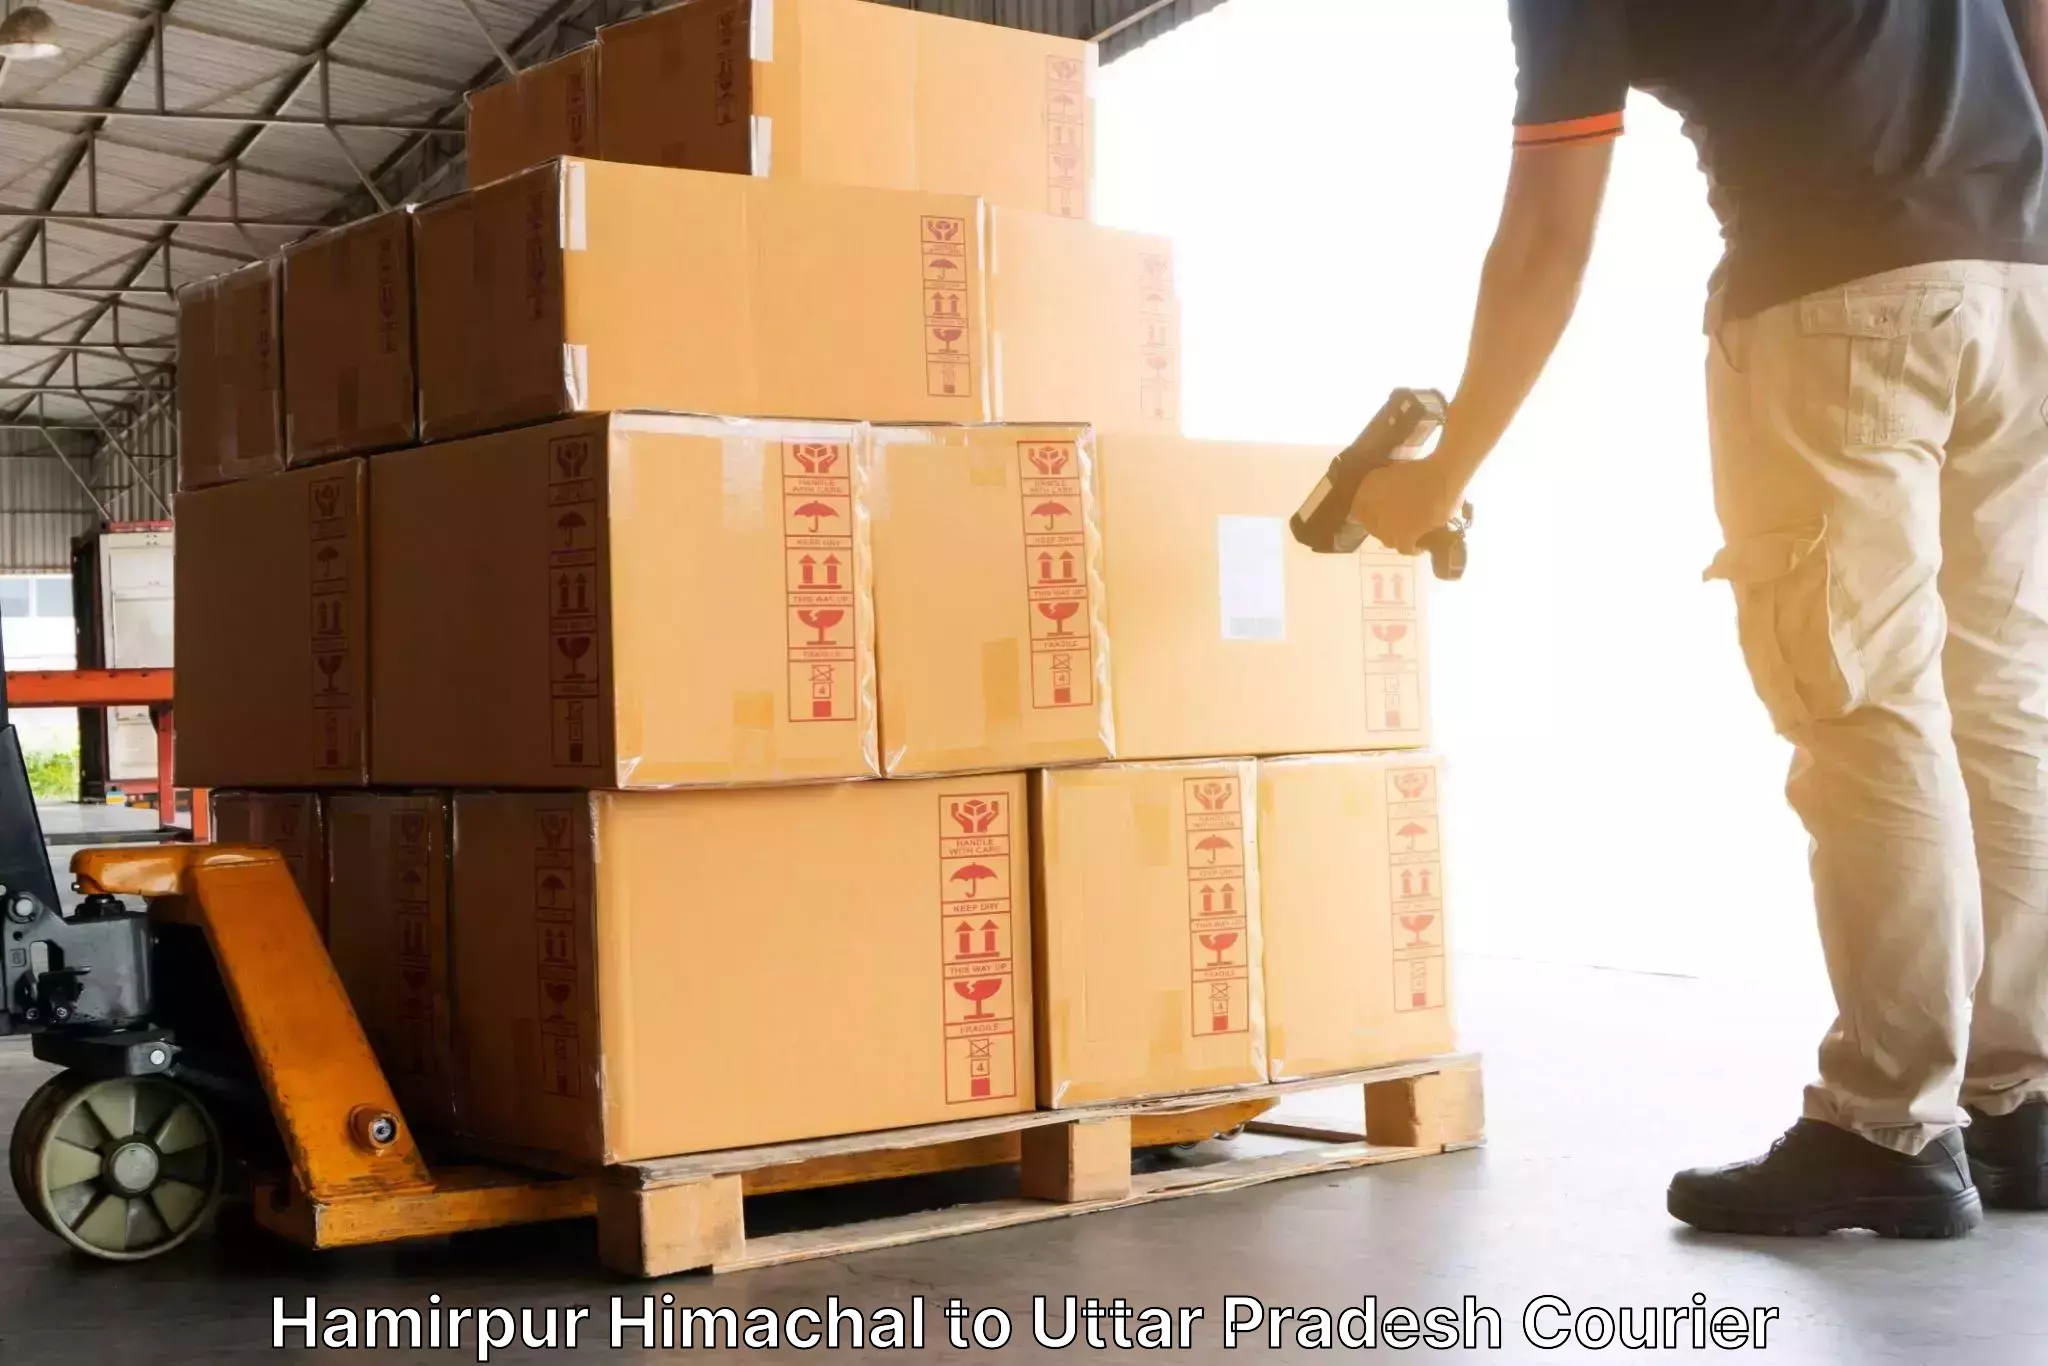 Courier service booking Hamirpur Himachal to Chirgaon